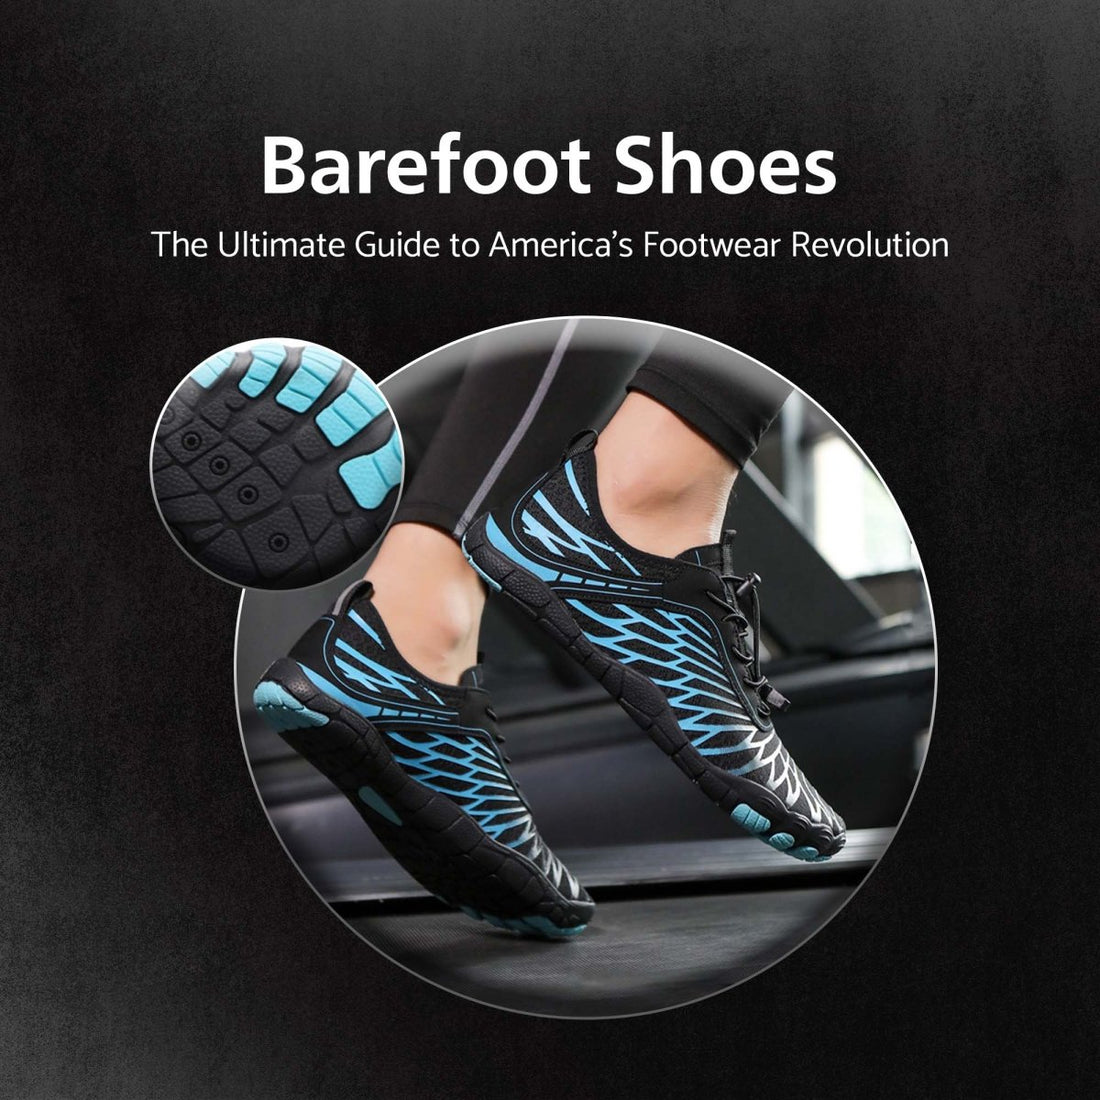 What are Barefoot shoes?